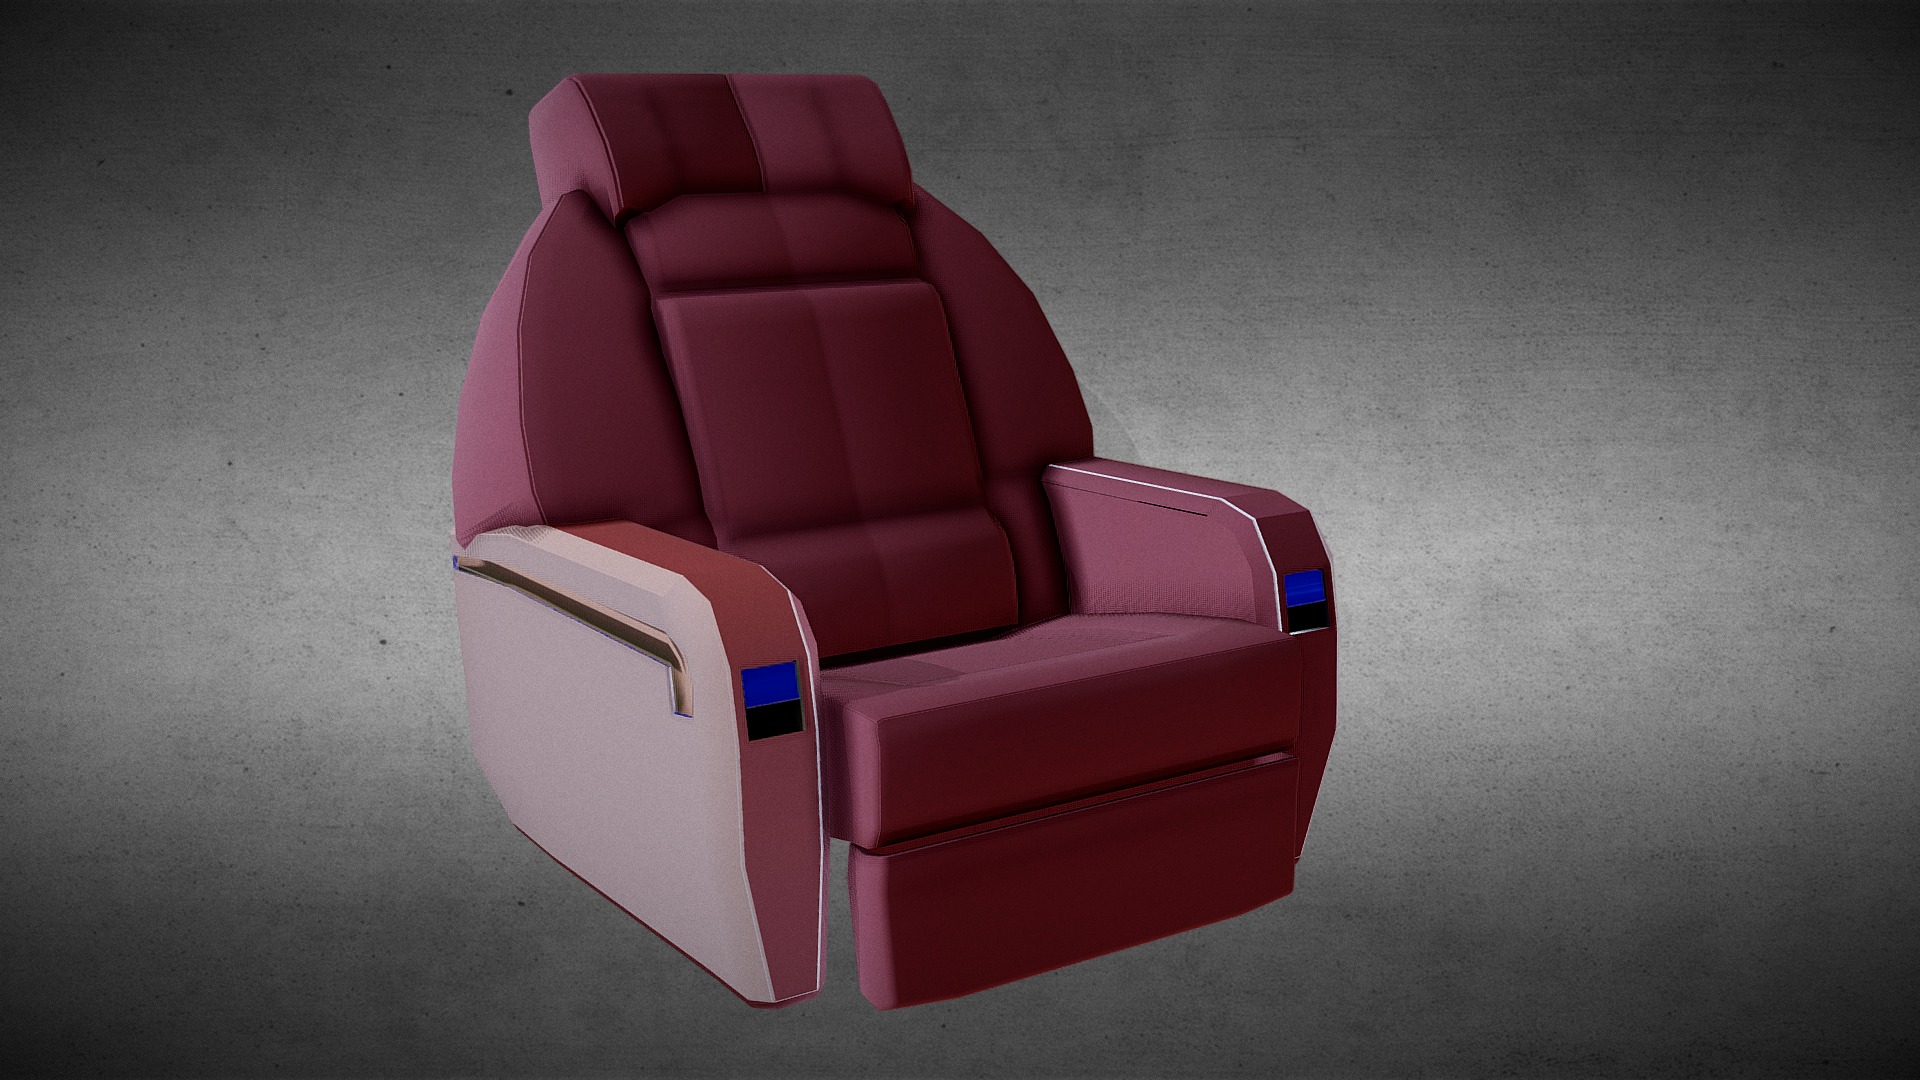 3D model Business class armchair - This is a 3D model of the Business class armchair. The 3D model is about a red couch on a grey surface.